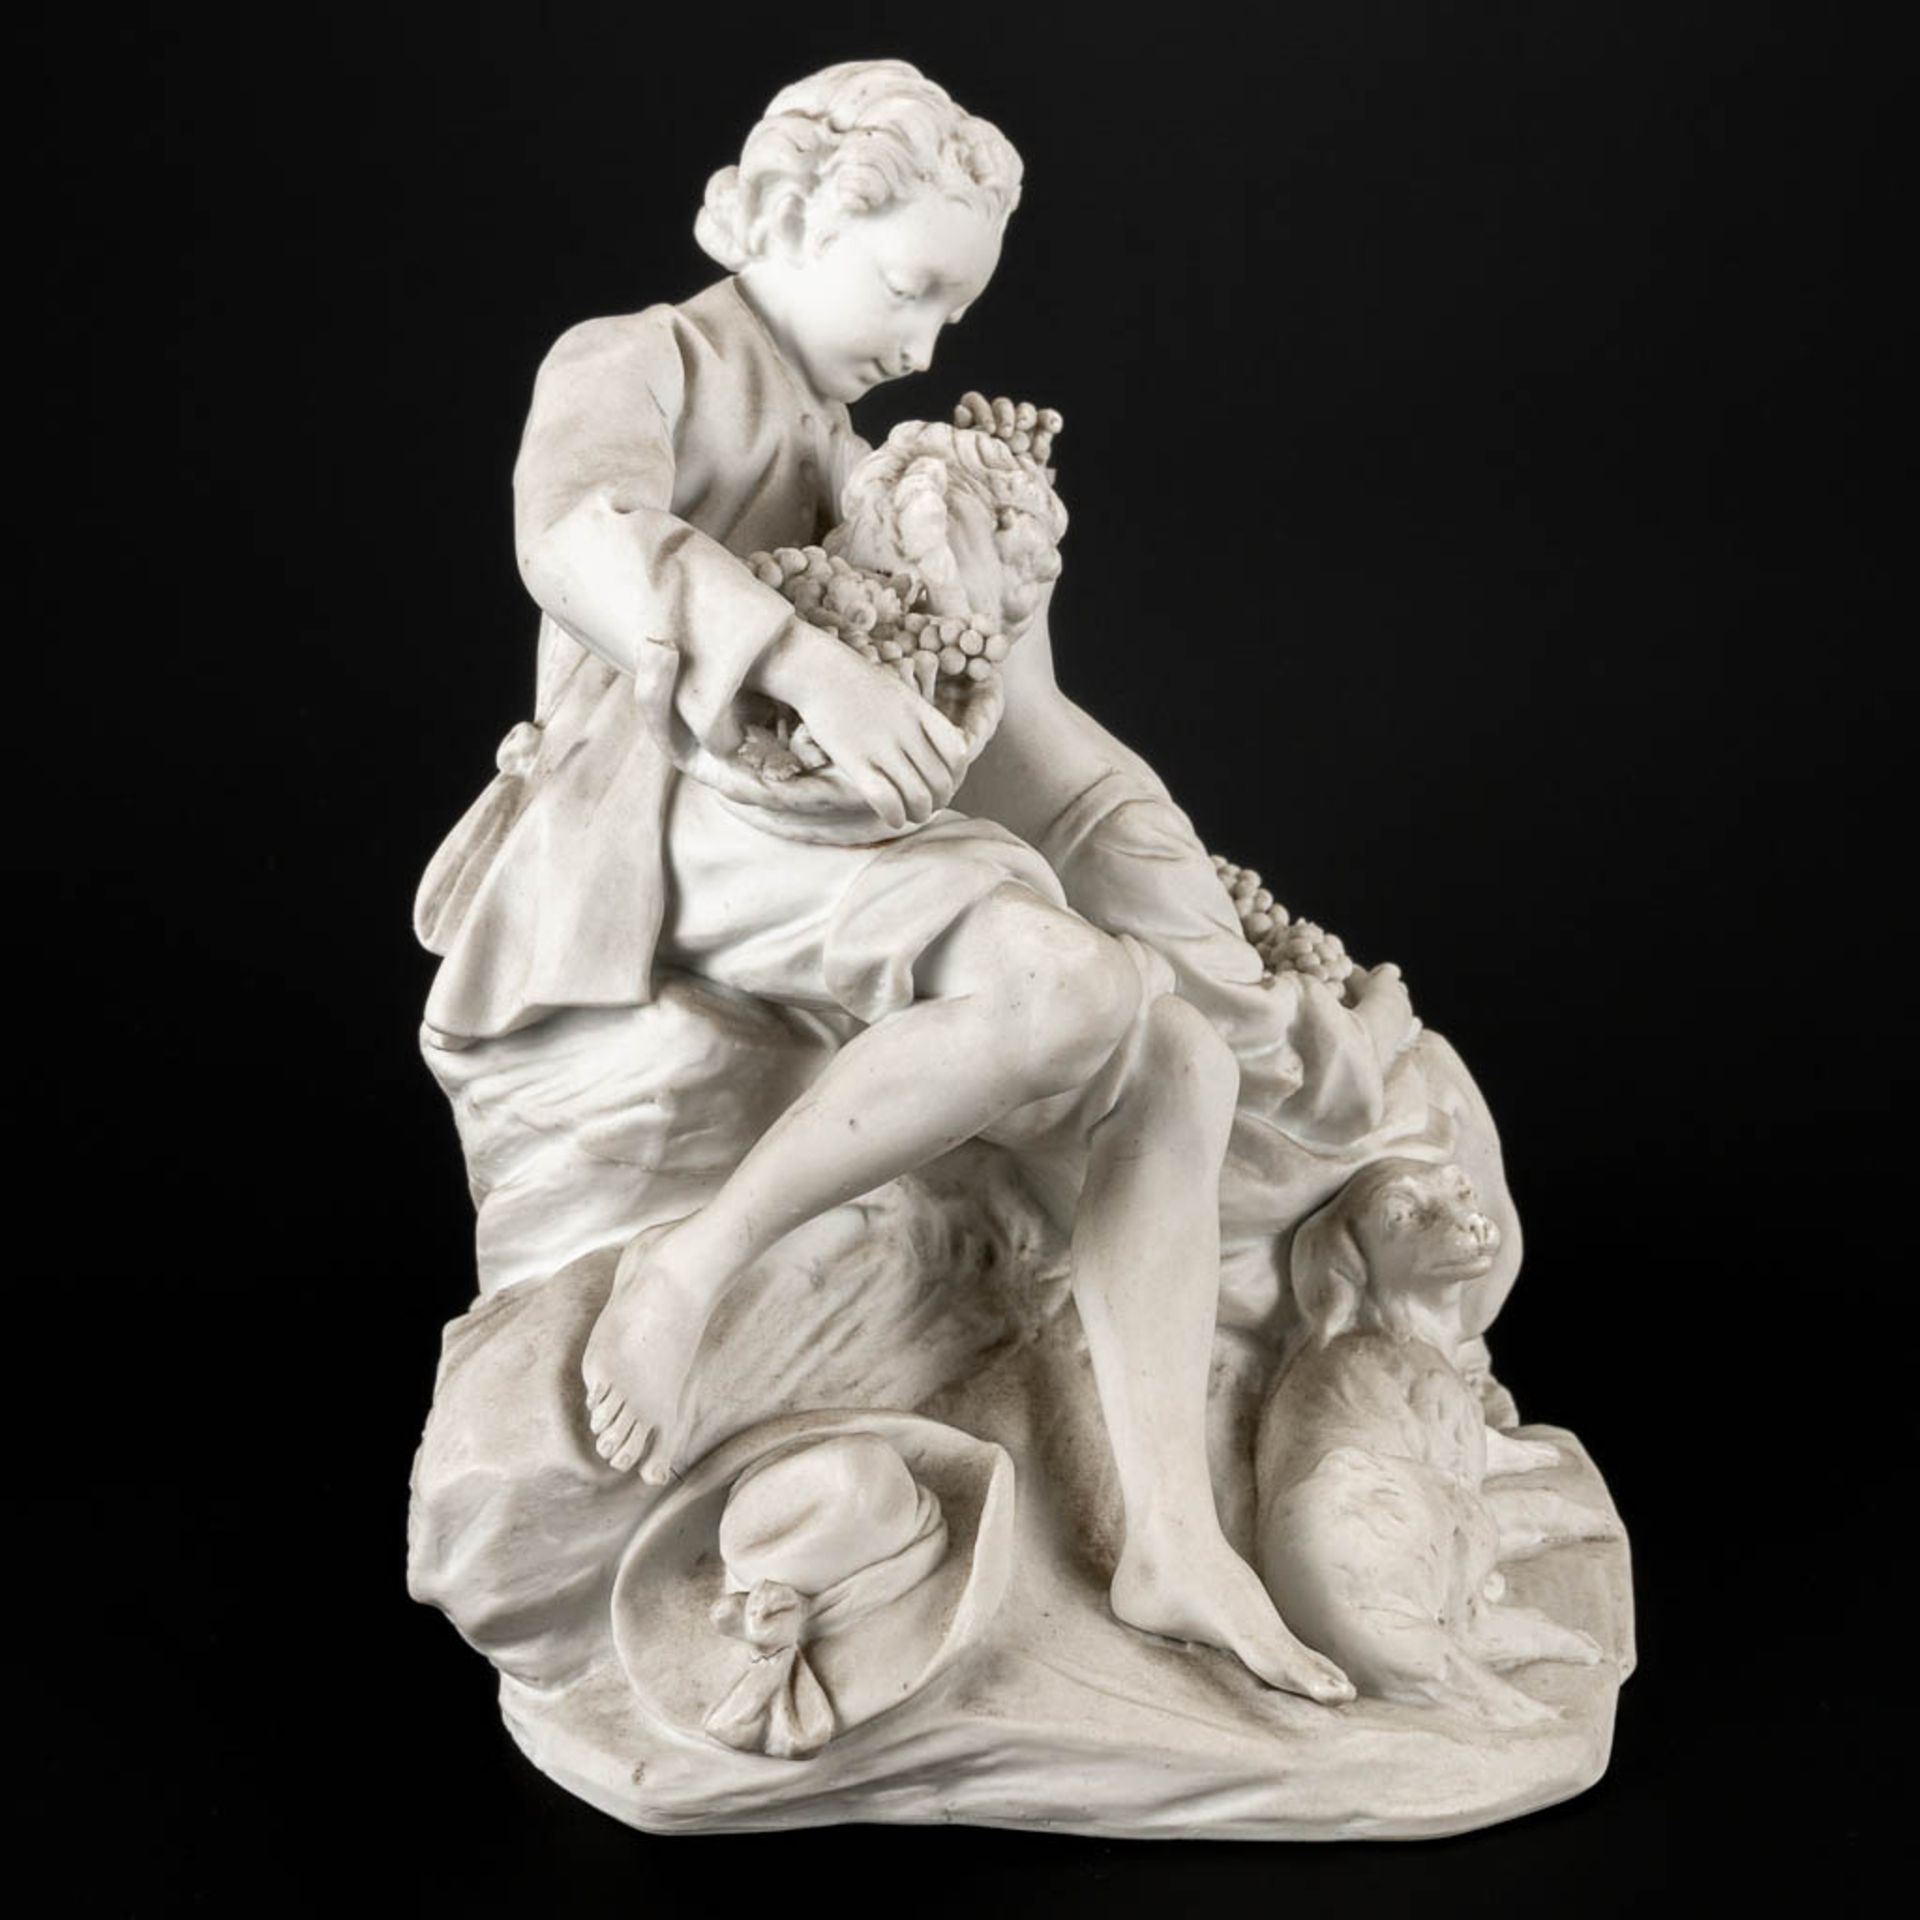 A romantic scene made of biscuit porcelain and marked Sevres. 19th century. (17 x 23 x 22 cm) - Image 2 of 20